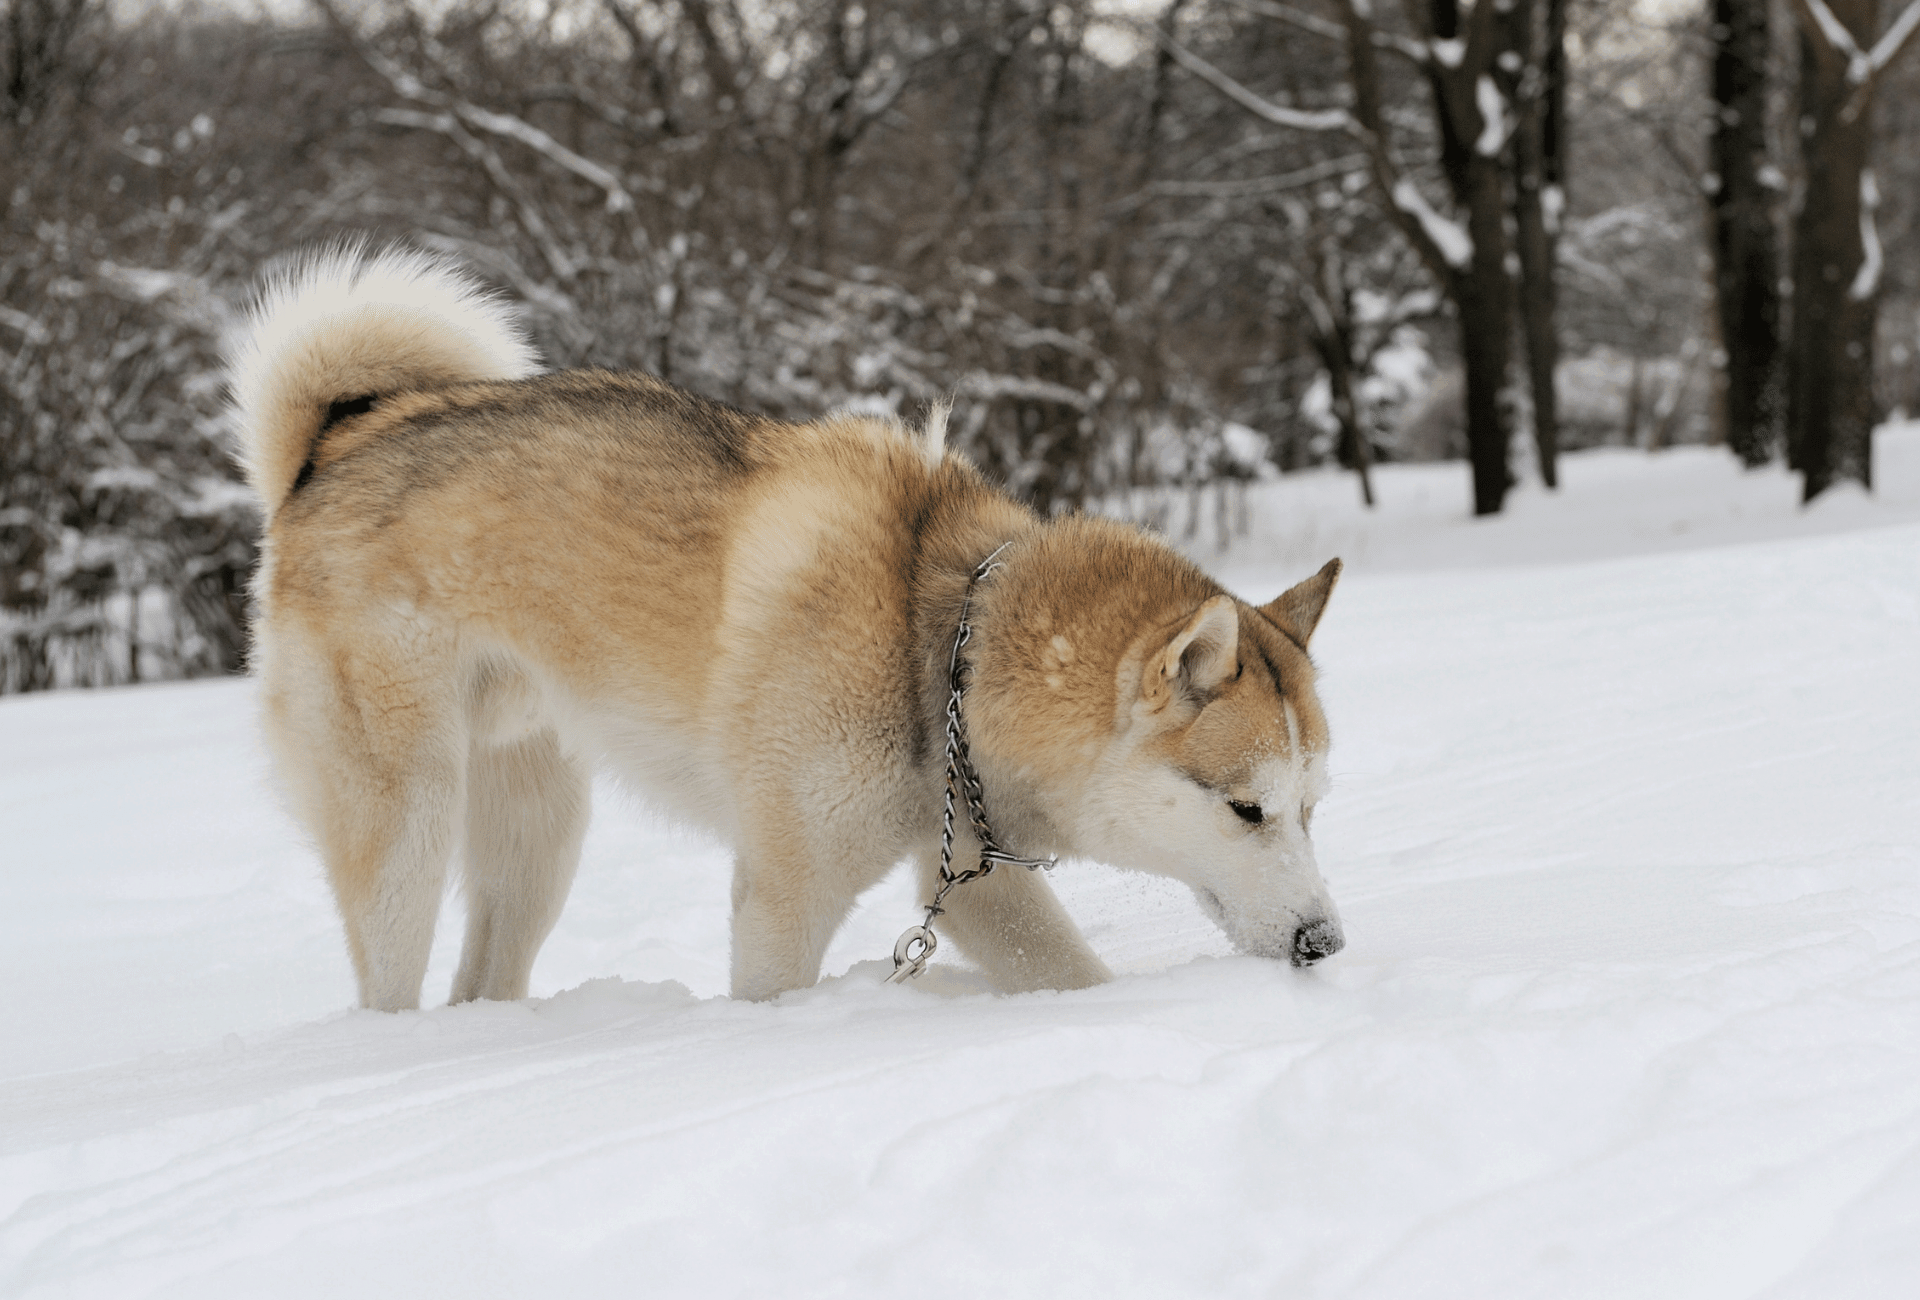 Sable Husky with a reddish undercoat and grey tips walking in the snow.